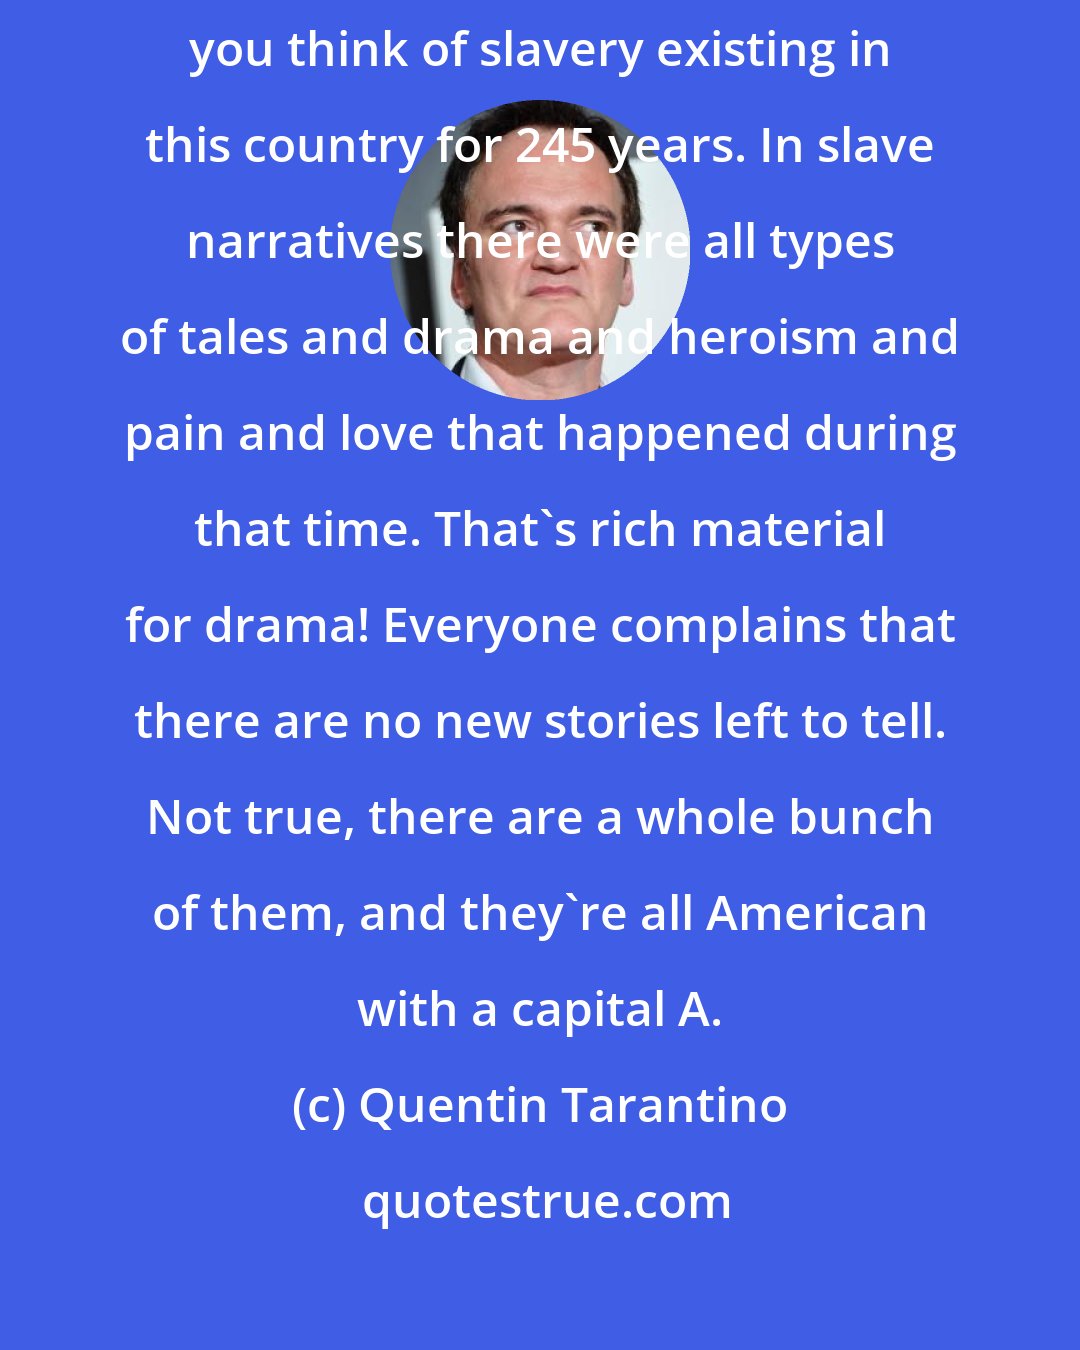 Quentin Tarantino: Frankly, Django is an American story that needs to be told, when you think of slavery existing in this country for 245 years. In slave narratives there were all types of tales and drama and heroism and pain and love that happened during that time. That's rich material for drama! Everyone complains that there are no new stories left to tell. Not true, there are a whole bunch of them, and they're all American with a capital A.